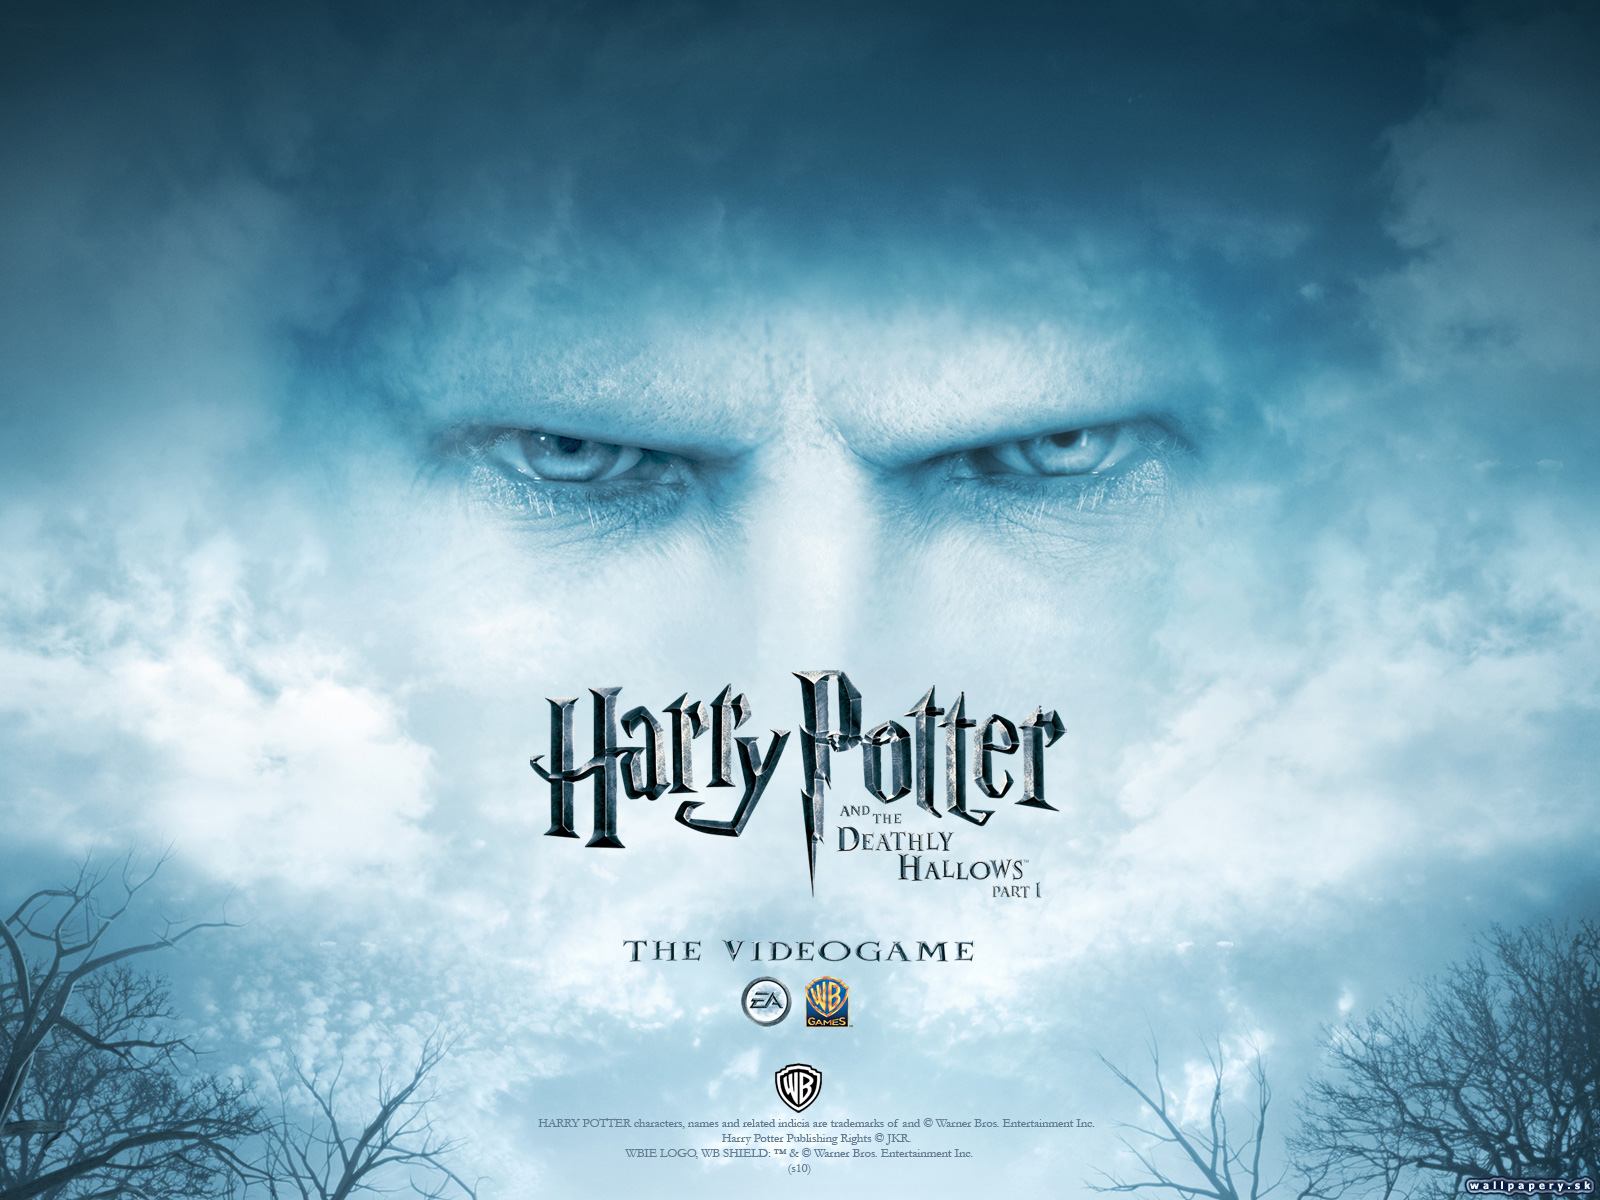 Harry Potter and the Deathly Hallows: Part 1 - wallpaper 4